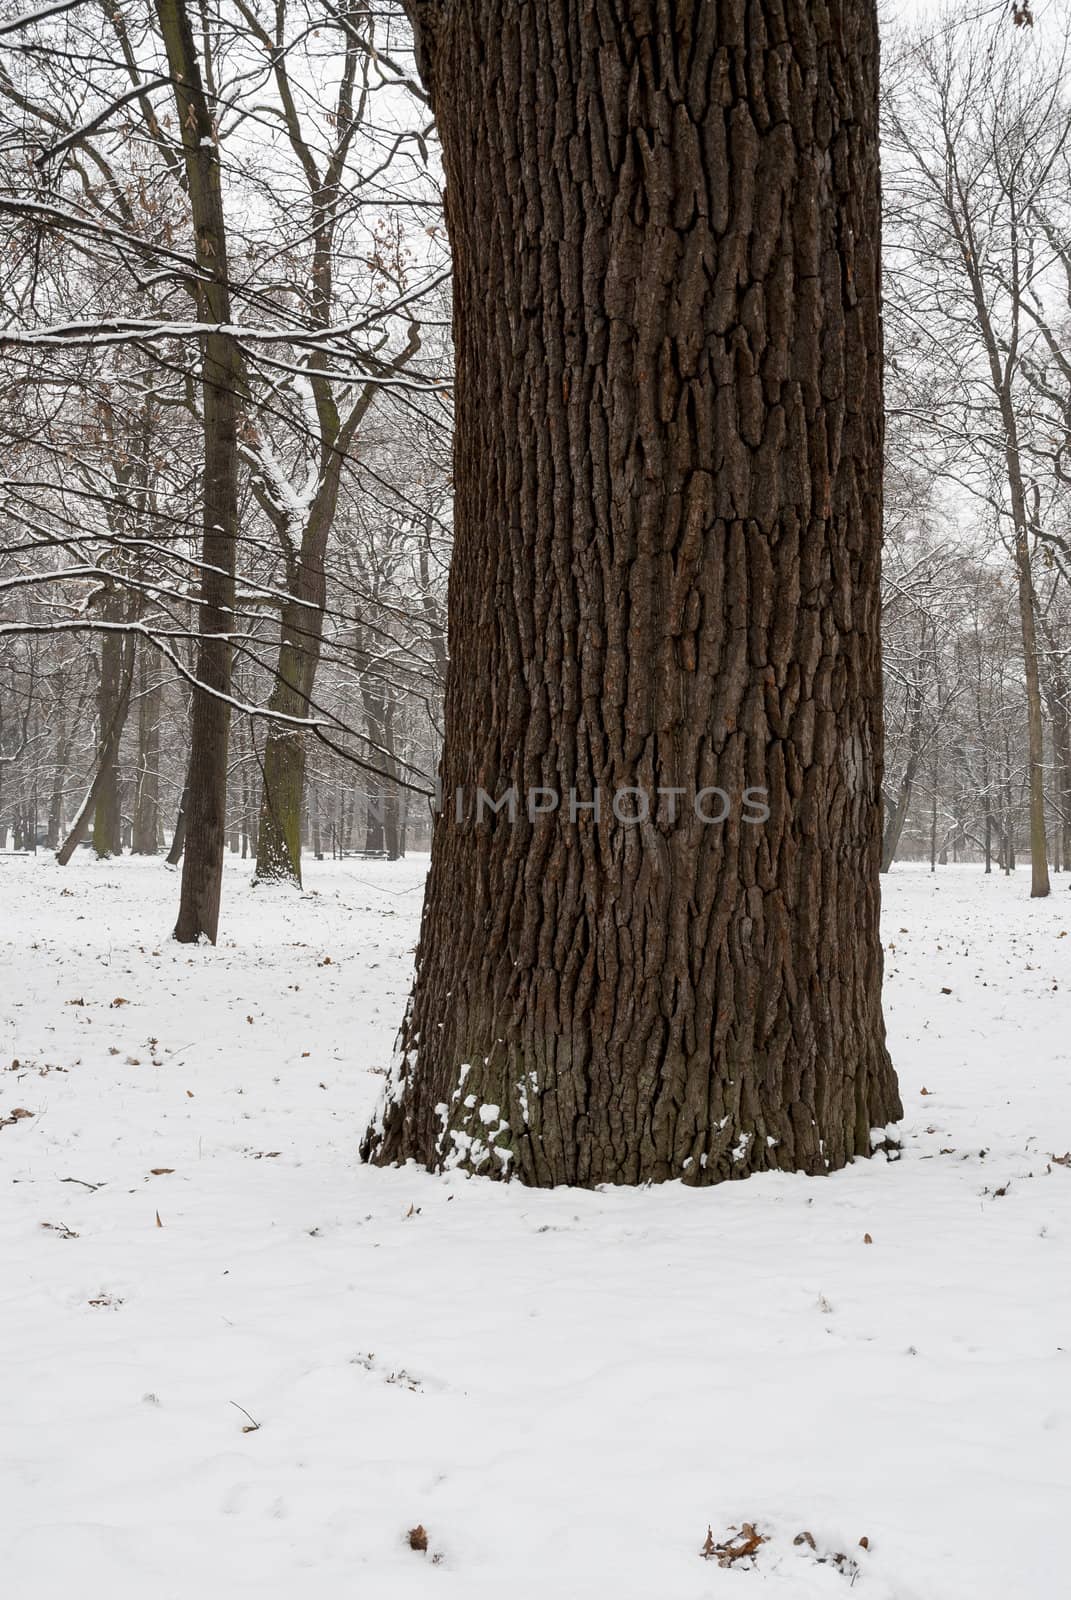 Focus on tree. Snowy scene from Warsaw, Poland.